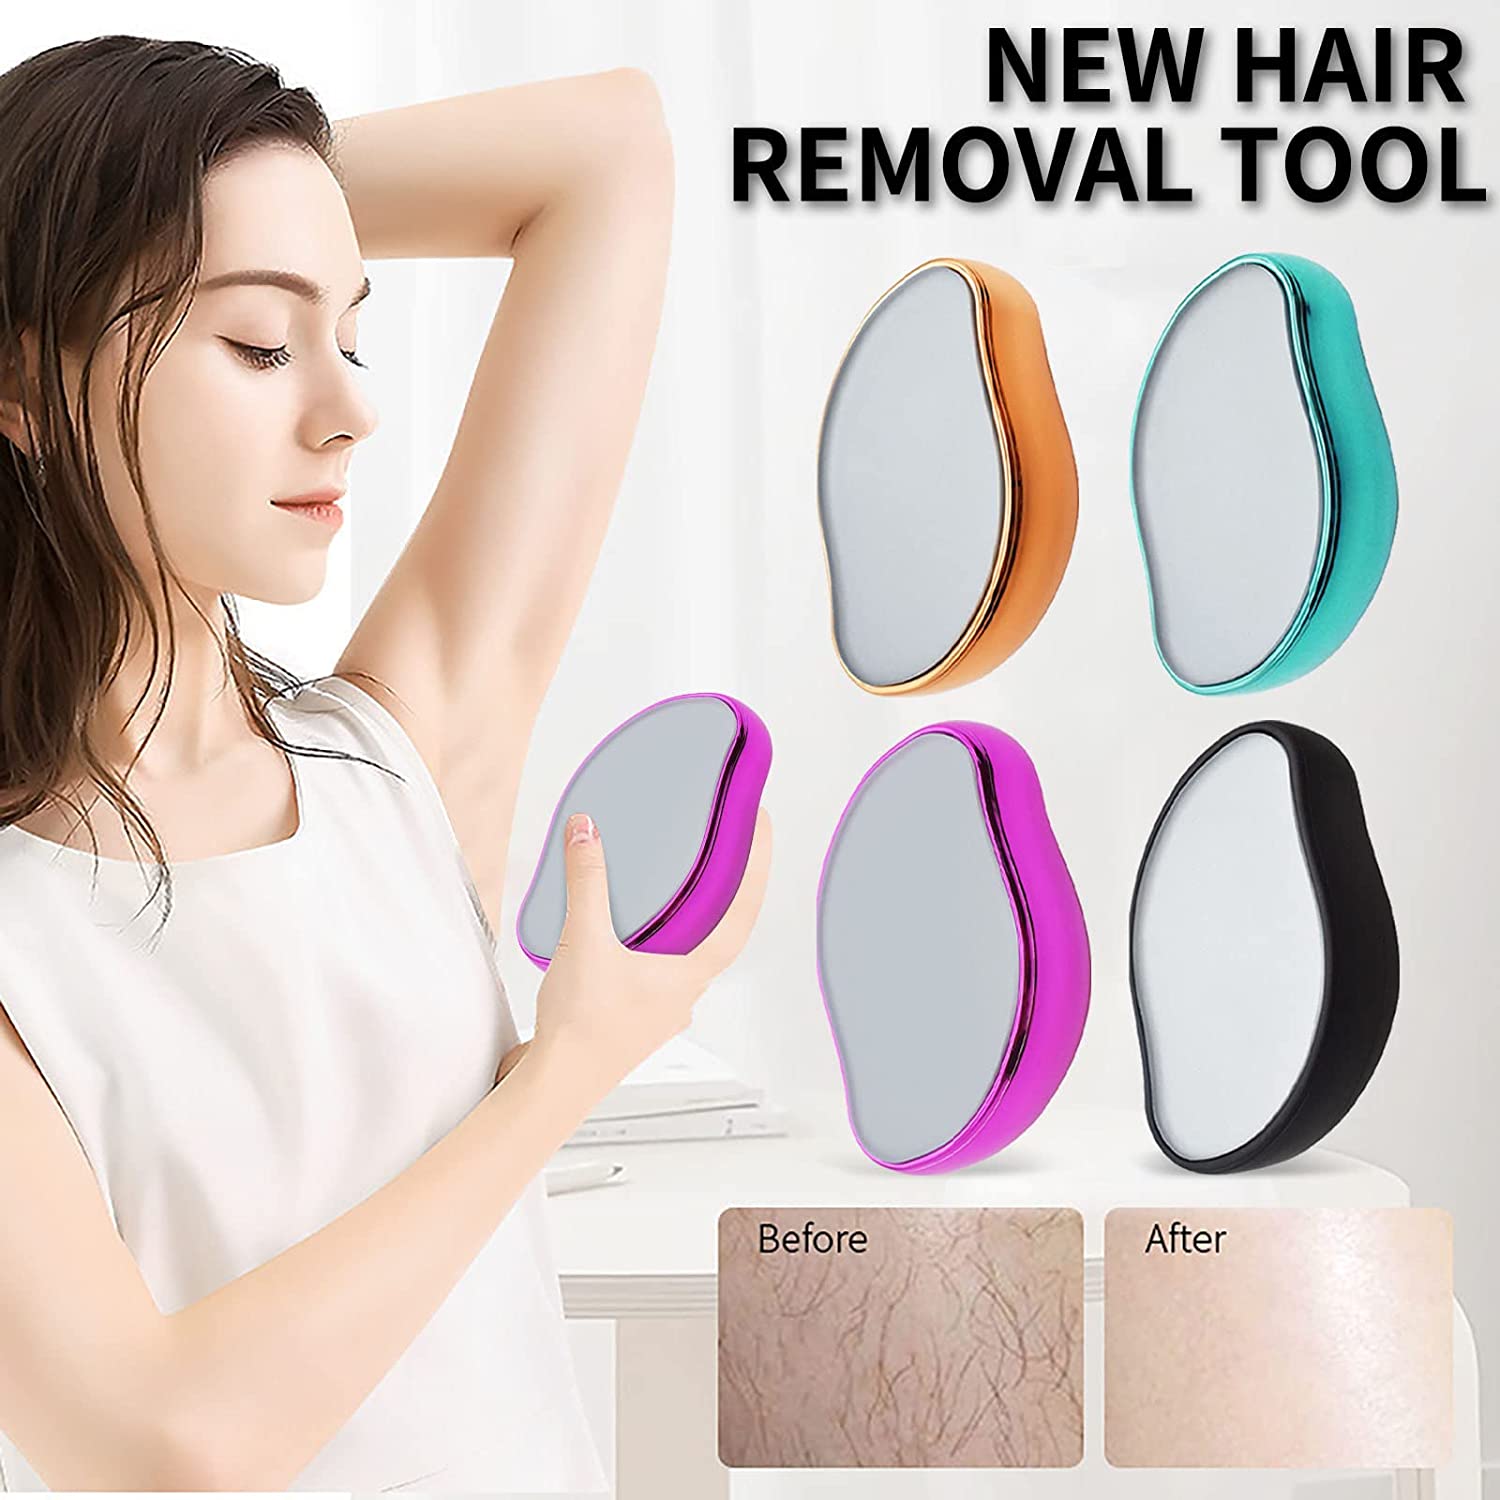 New Glass Foot Callus Remover & Hair Remover Tool For Women